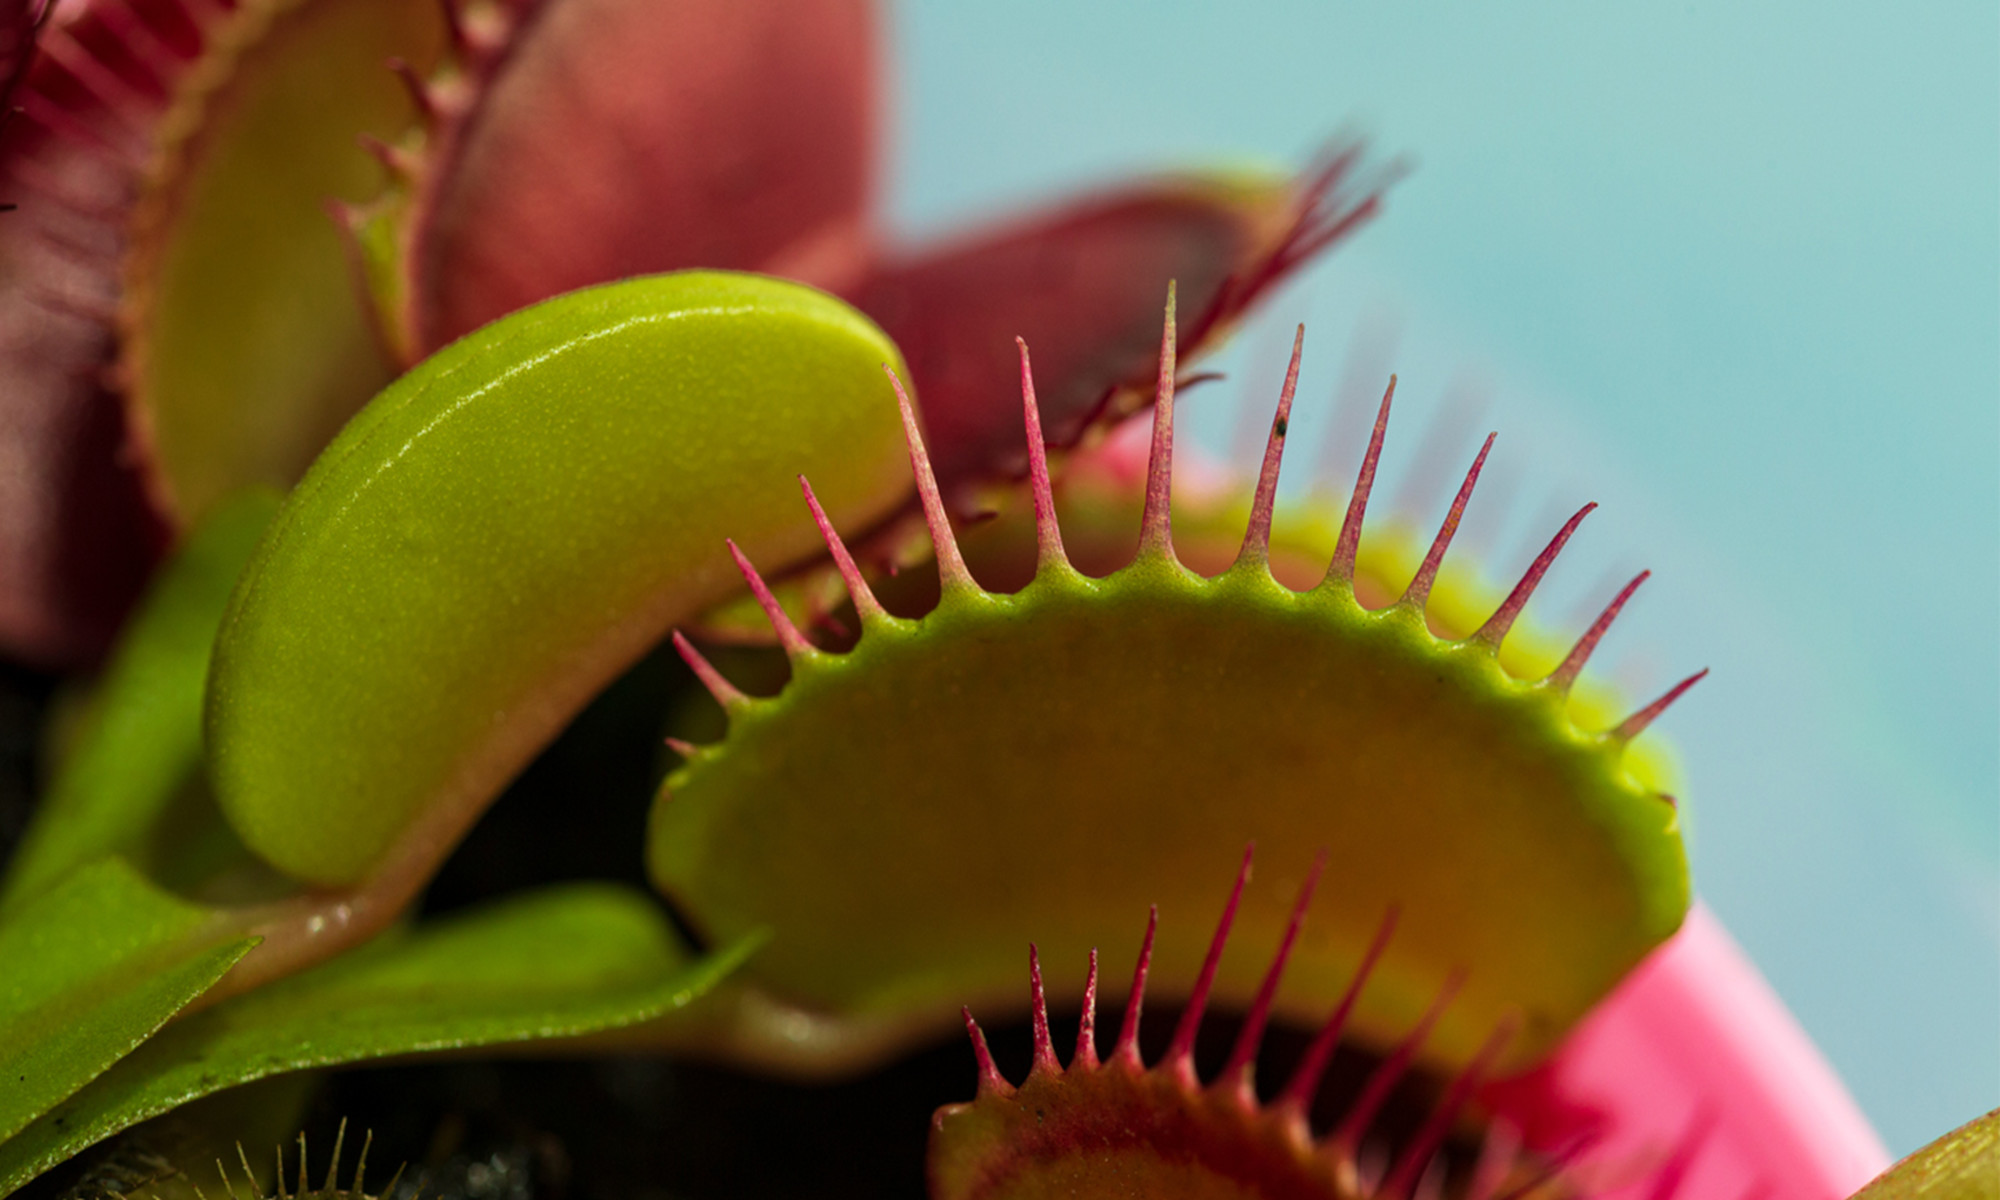 How to Care for a Venus Fly Trap